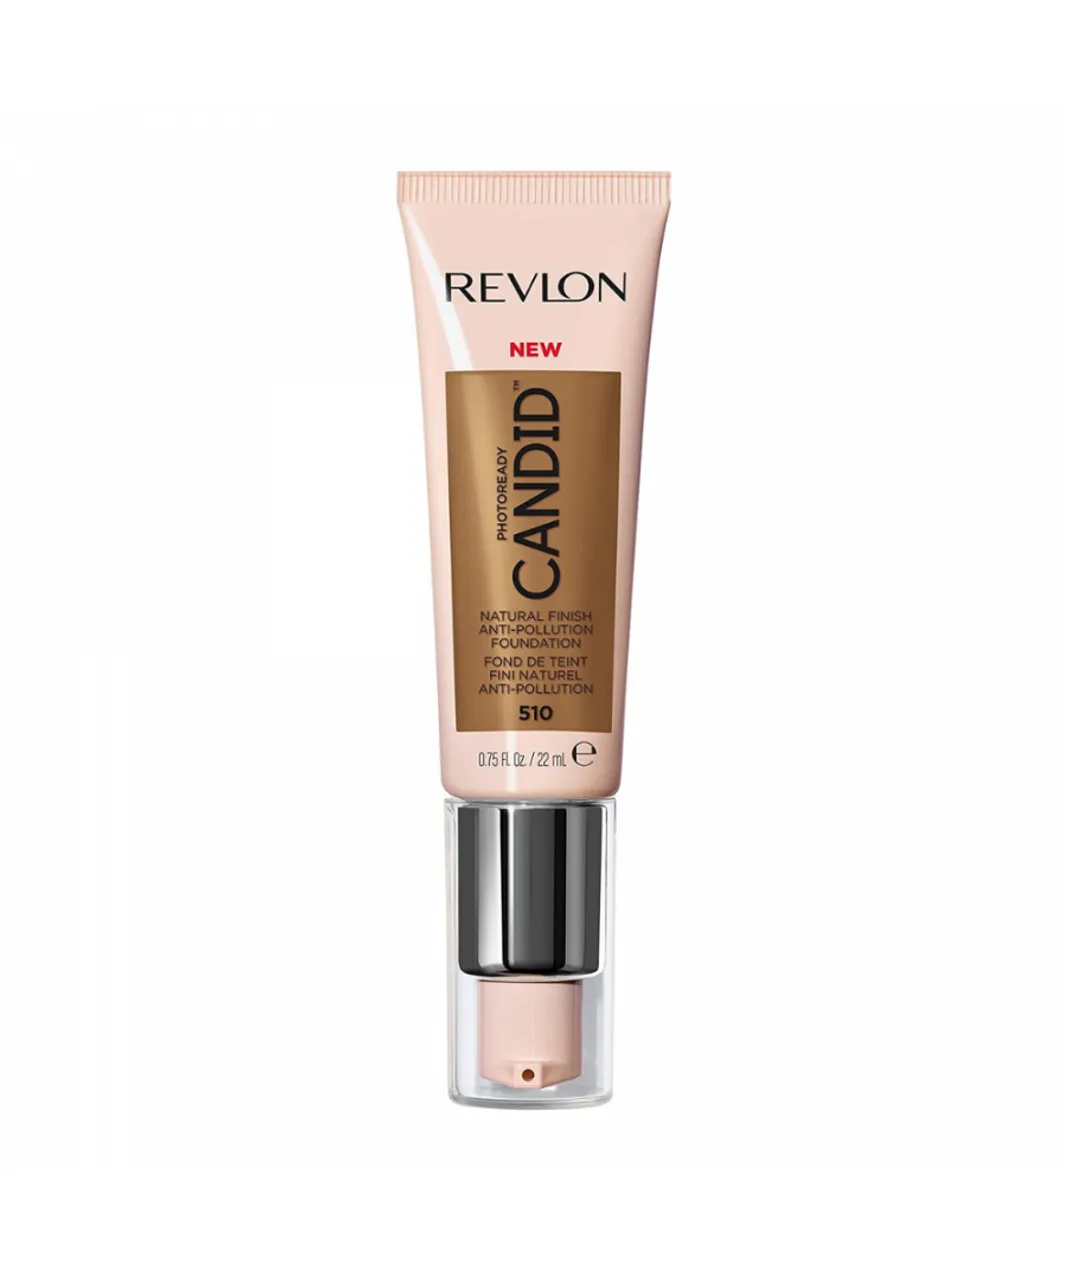 Revlon Womens Photoready Candid Natural Finish Foundation 22ml - 510 Cappuccino - Blue - One Size